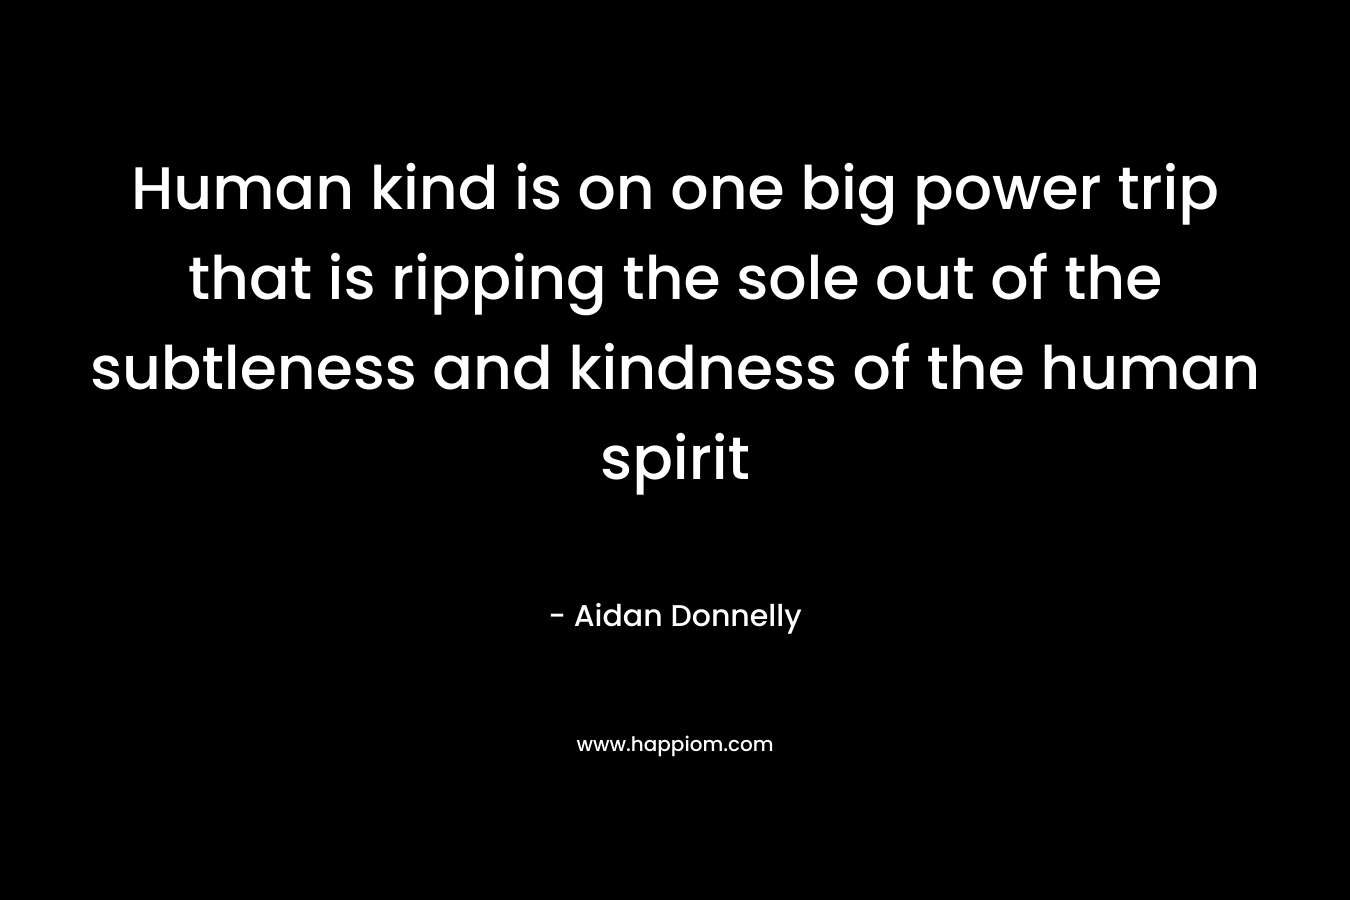 Human kind is on one big power trip that is ripping the sole out of the subtleness and kindness of the human spirit – Aidan Donnelly